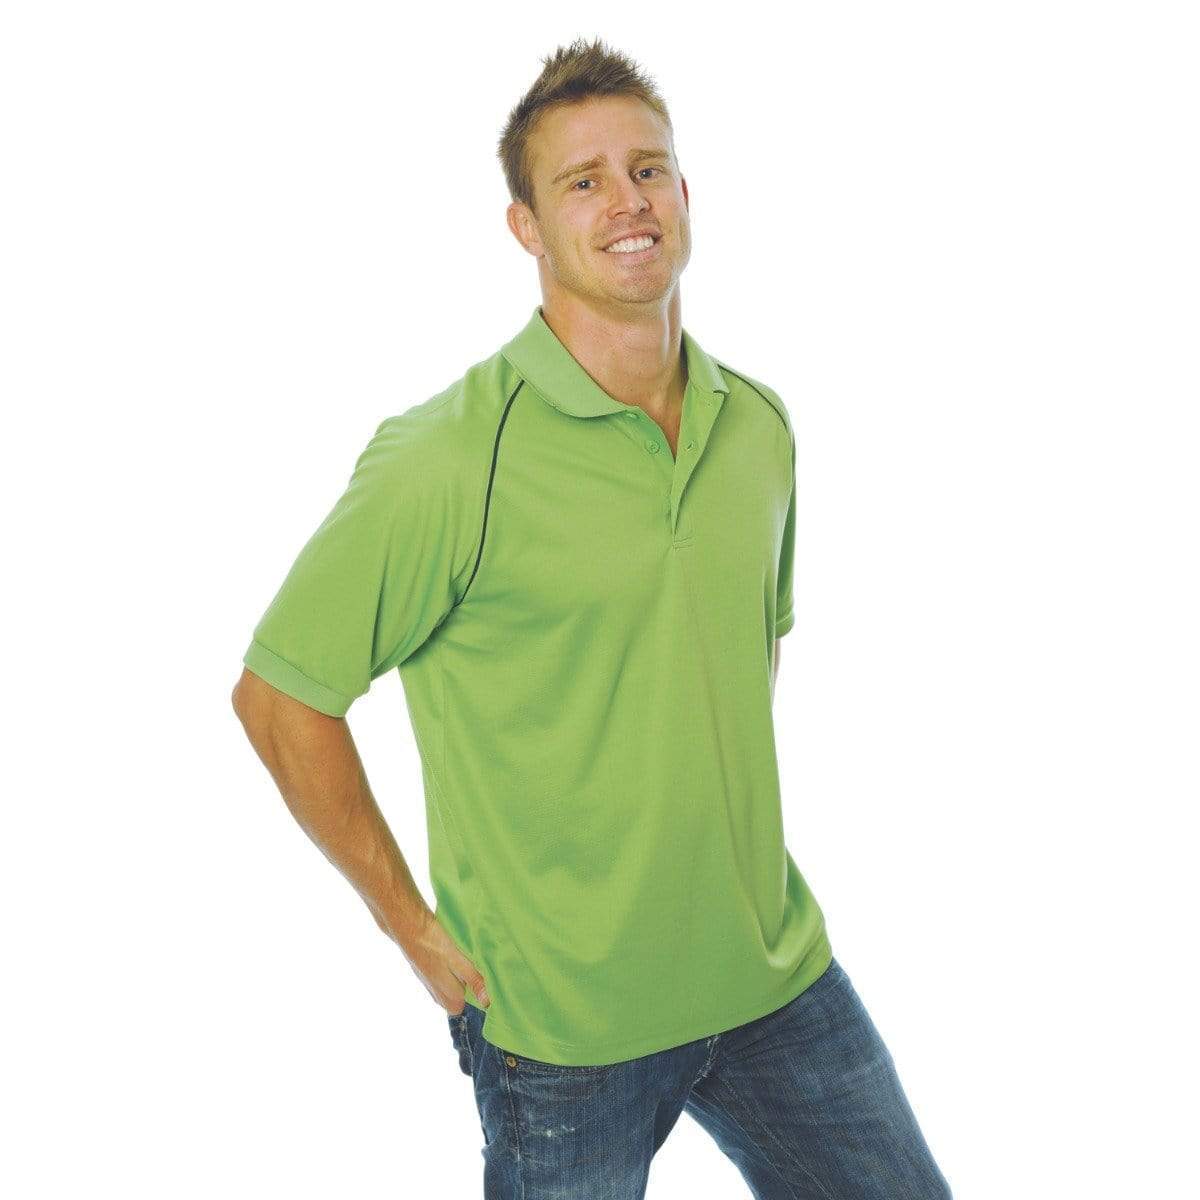 Dnc Workwear Men’s Cool-breathe Rome Polo - 5267 Casual Wear DNC Workwear Cool Lime/Navy S 